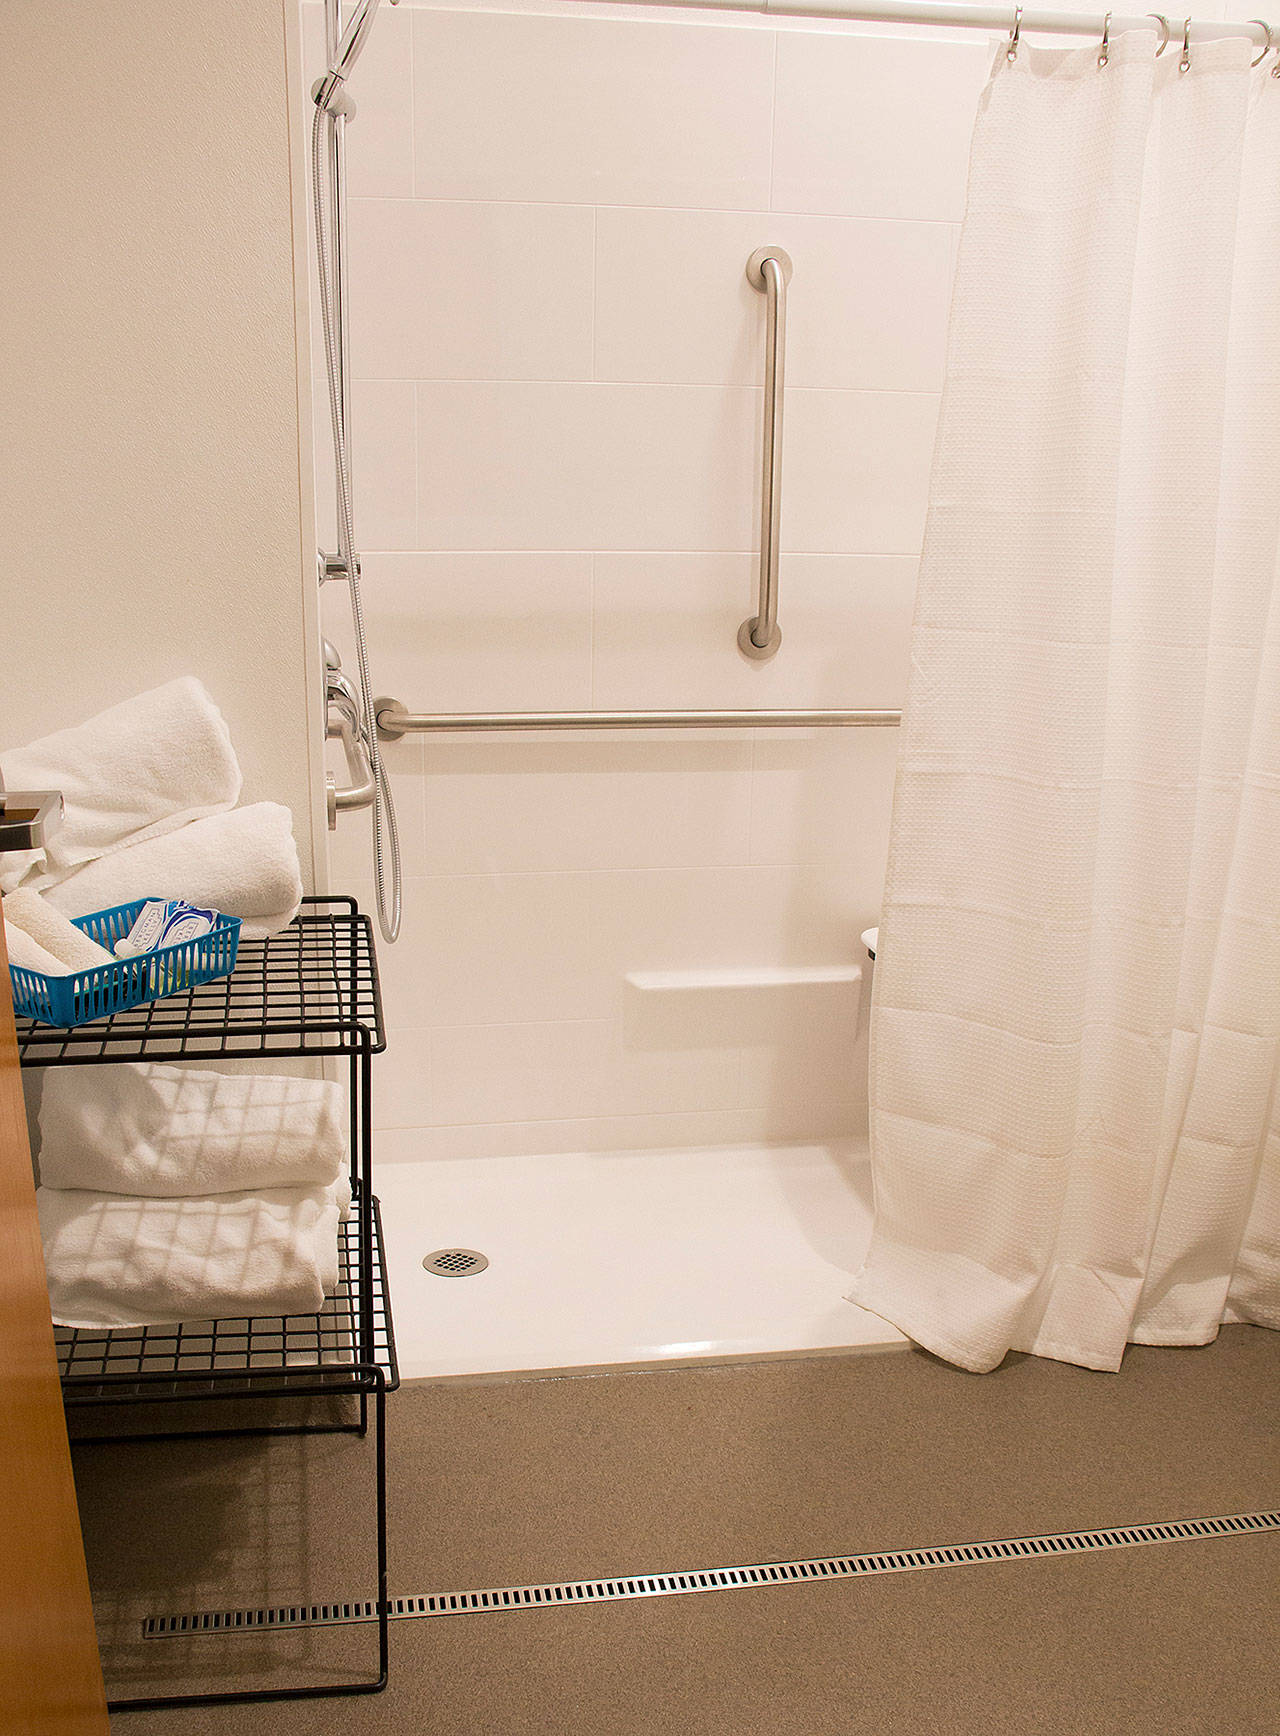 New showers are part of the expanded services at the Community Engagement Center in downtown Kent to serve the homeless. COURTESY PHOTO, Catholic Community Services